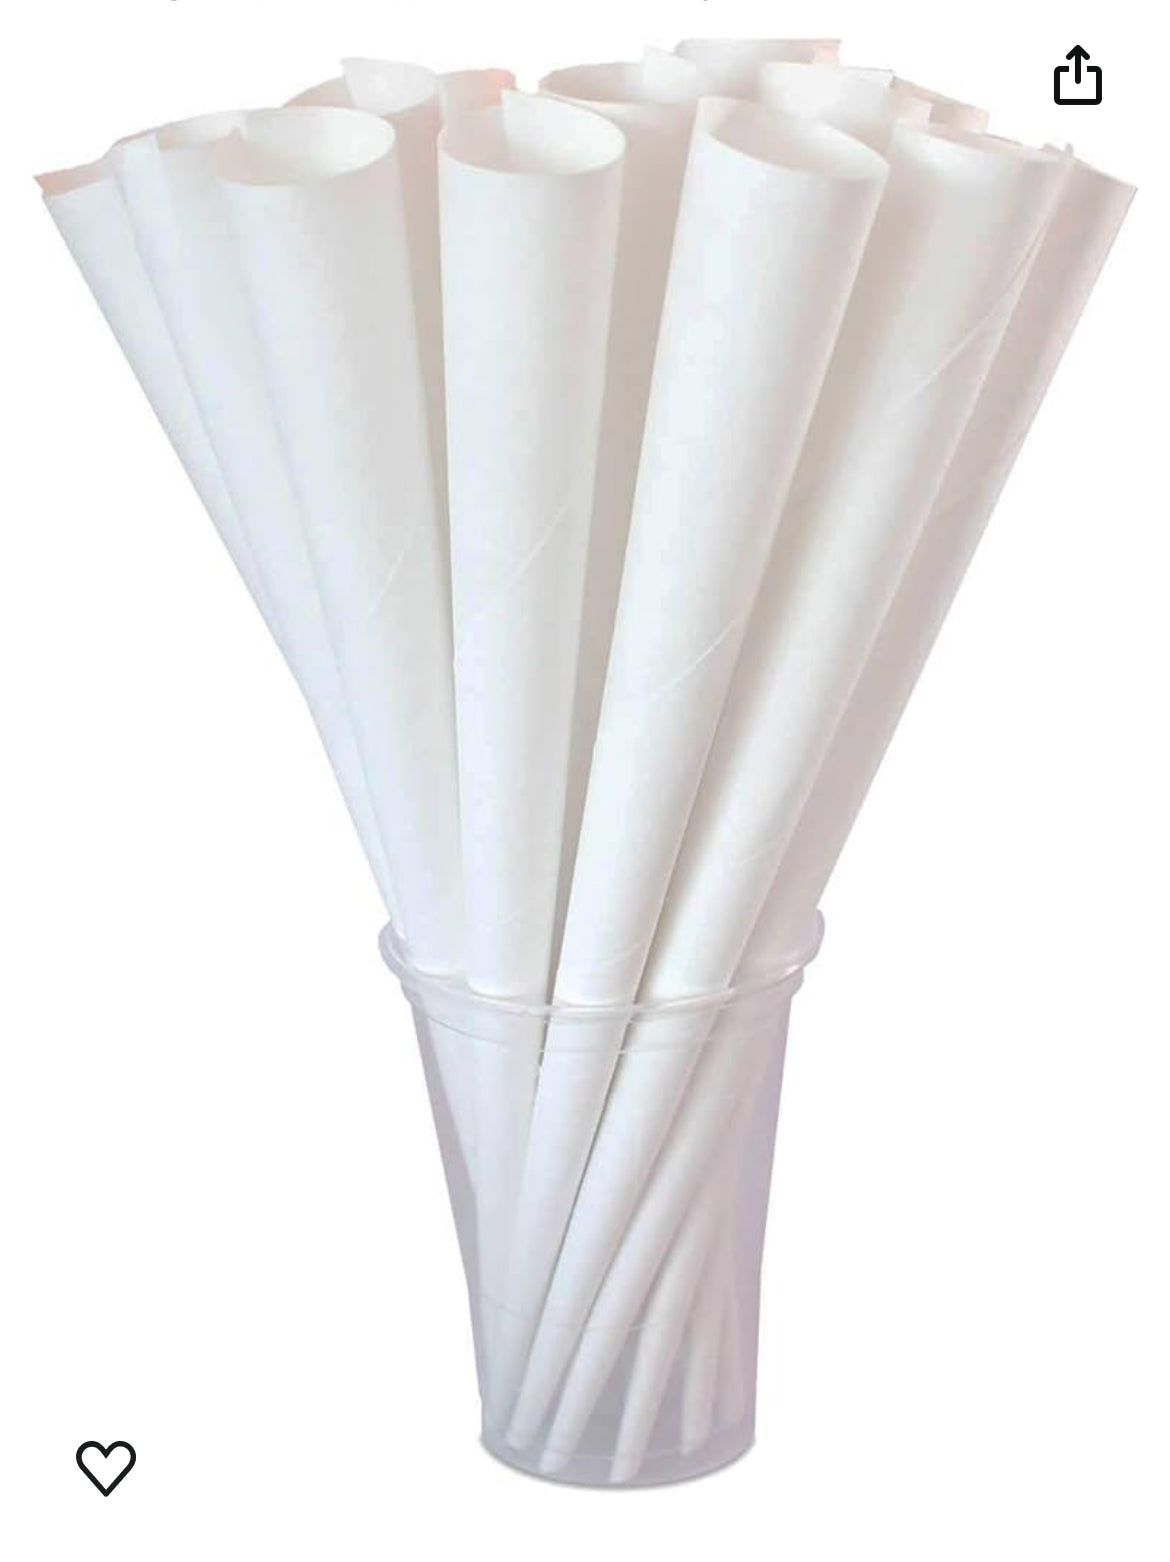 Cotton Candy Cones - 300 Pieces Plain Kraft Paper Candy Floss Sticks for Cotton Candy - Perfect for Parties and Events - Strong, Triple Wrapped, White Candy Floss Cones (300)